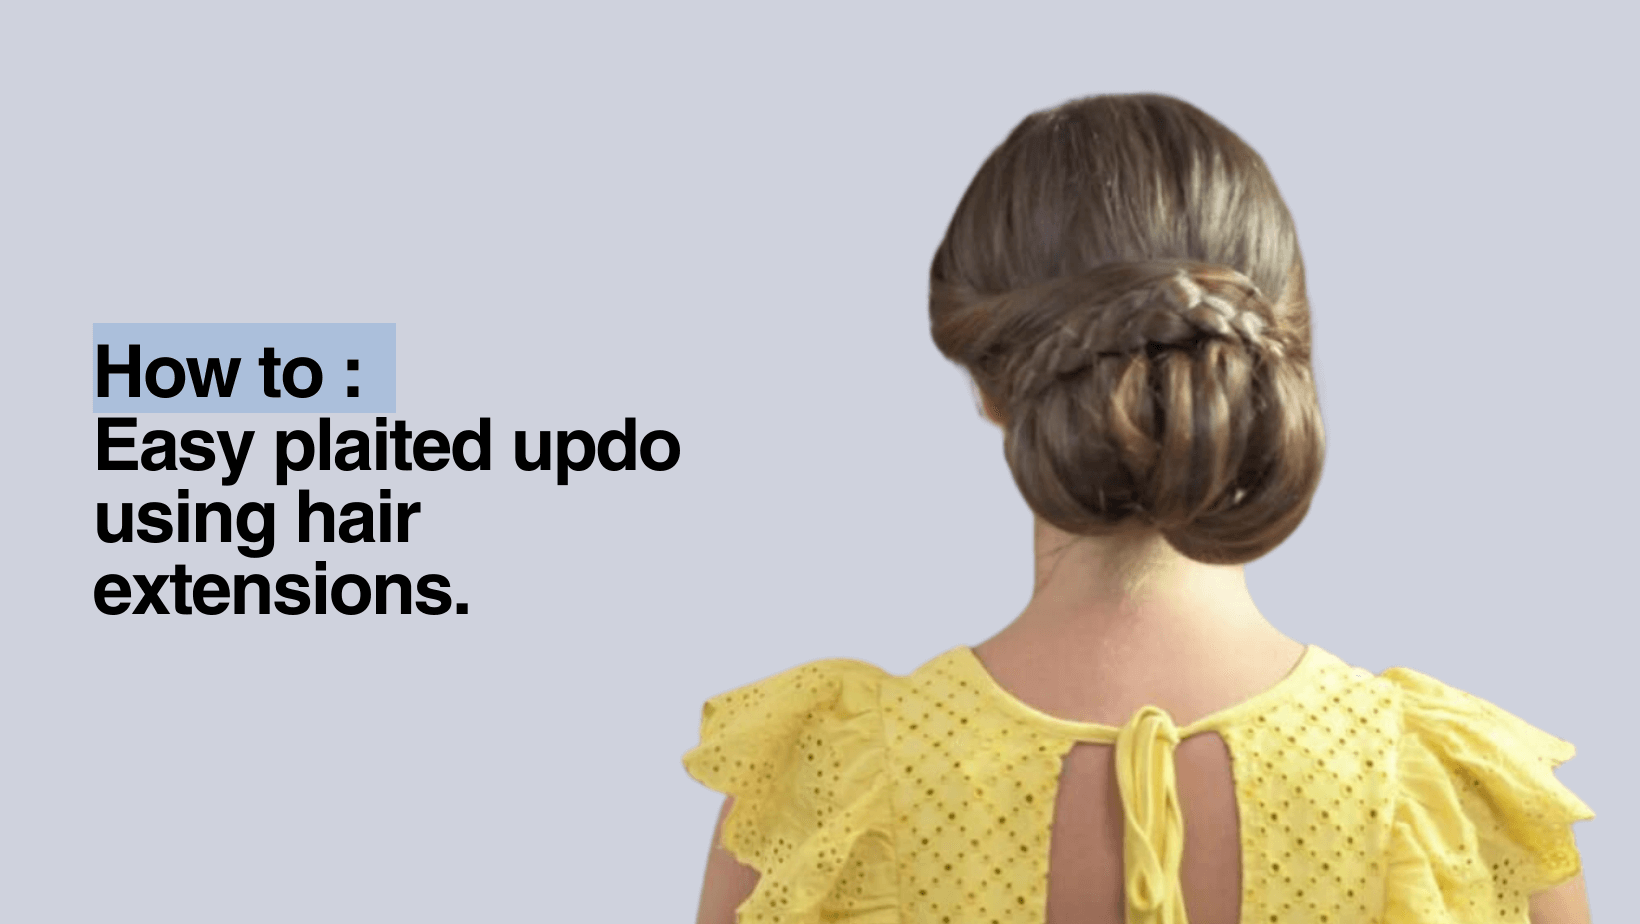 How to: Easy Plaited Updo Using Hair Extensions